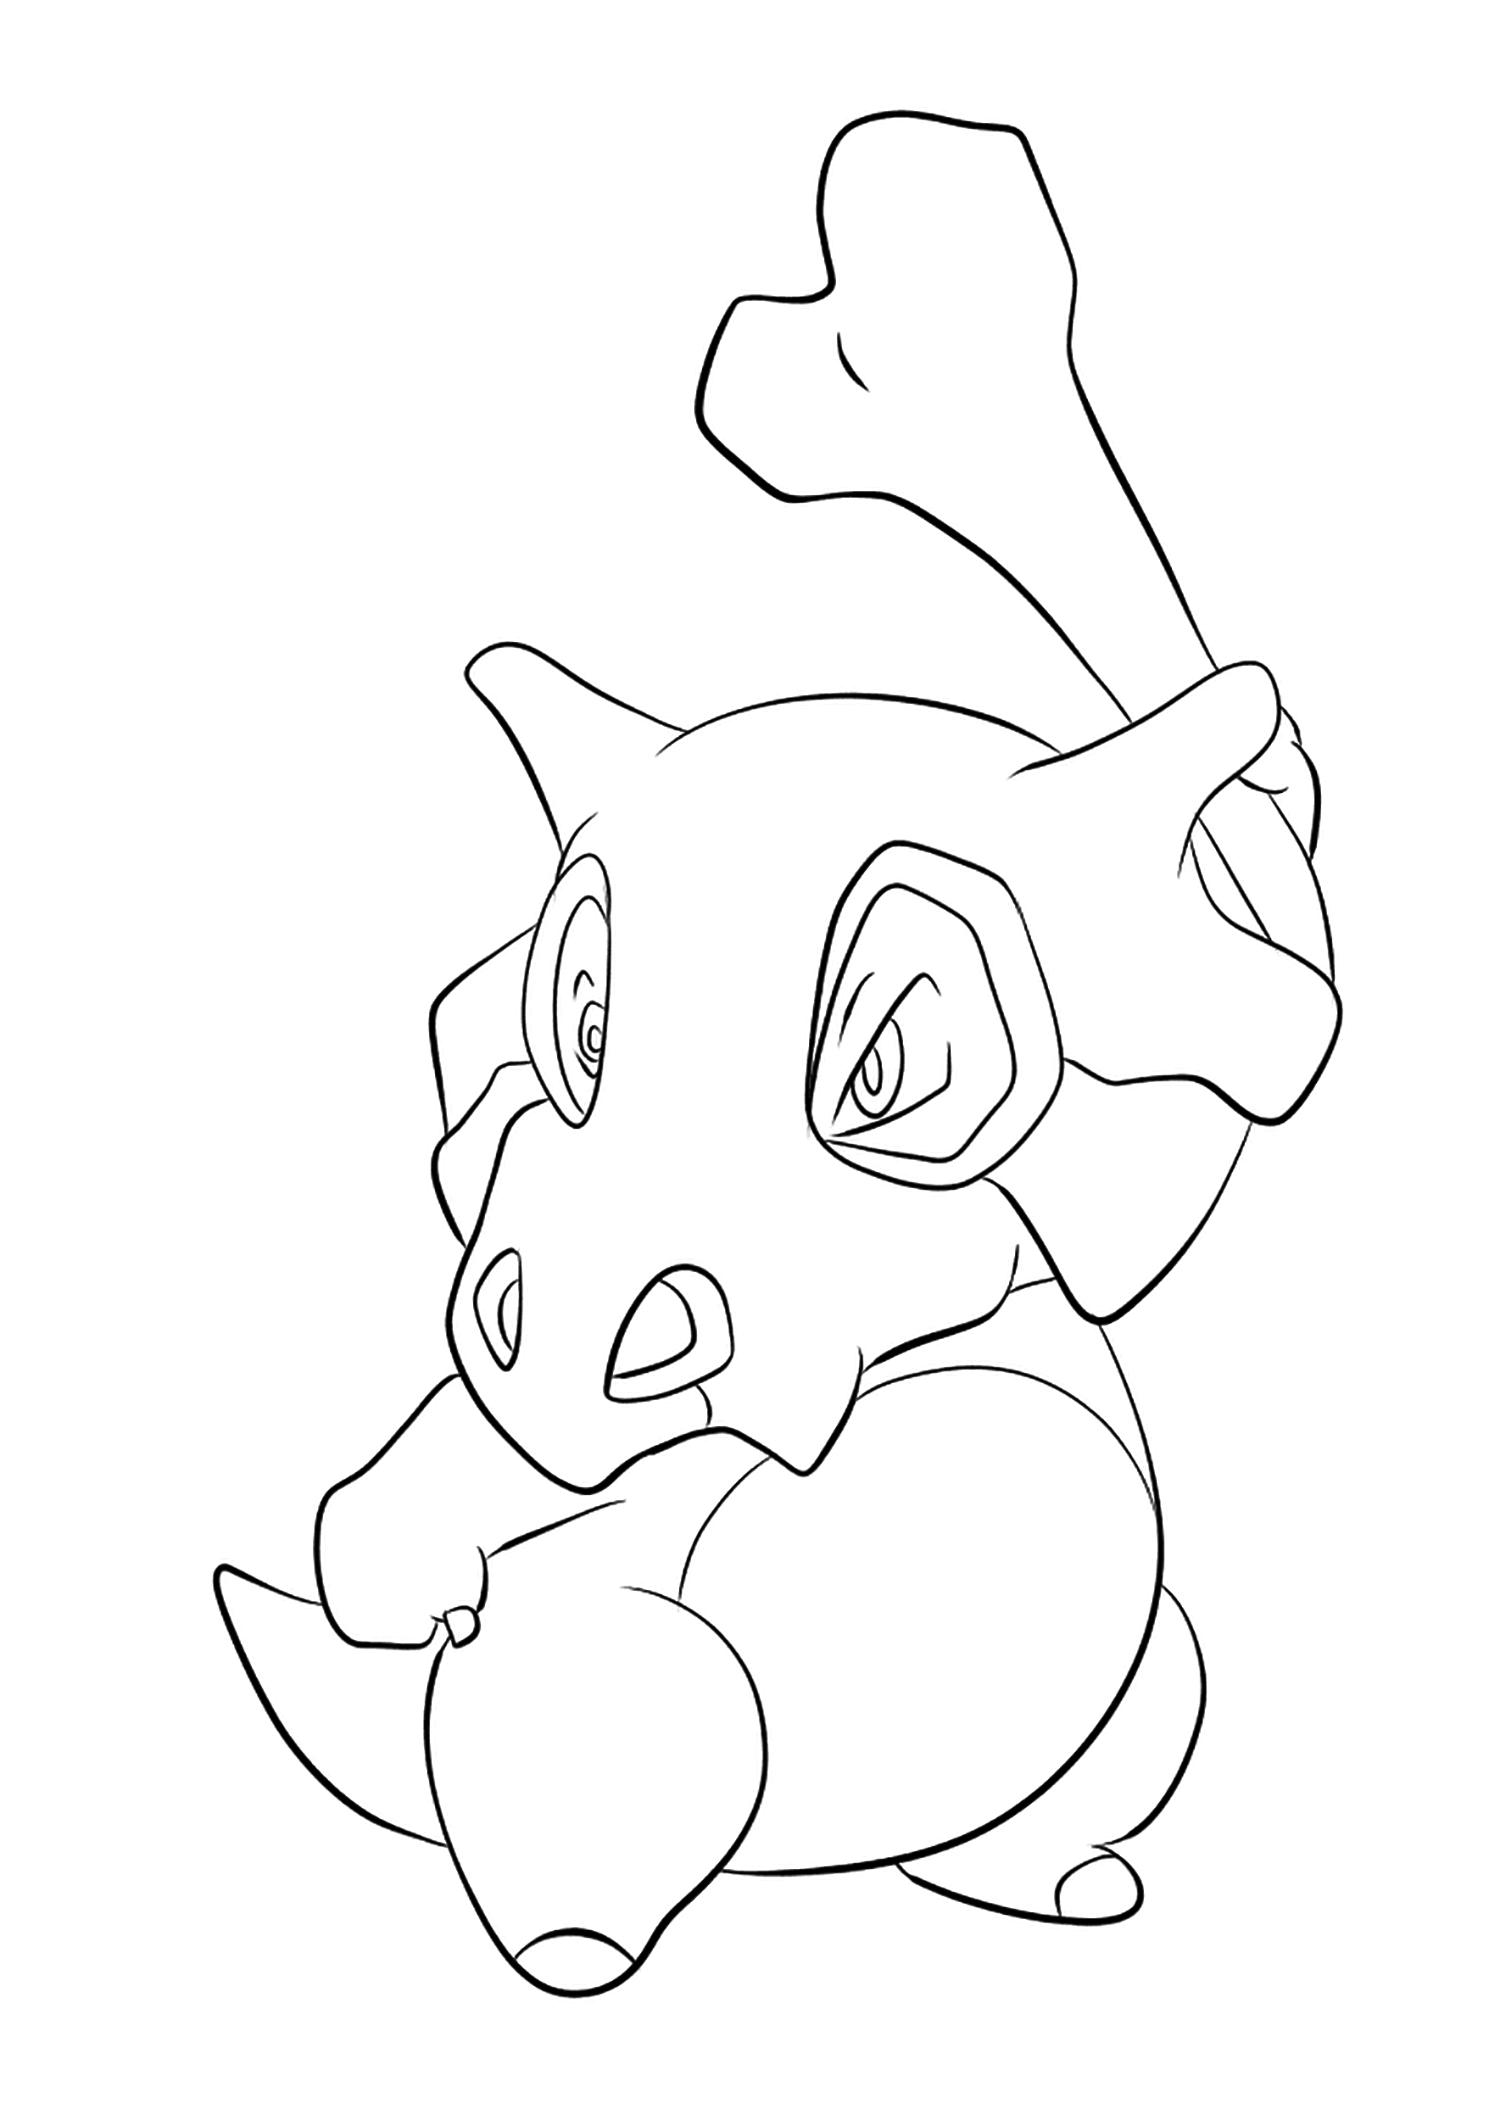 Cubone (No.104). Cubone Coloring page, Generation I Pokemon of type GroundOriginal image credit: Pokemon linearts by Lilly Gerbil on Deviantart.Permission:  All rights reserved © Pokemon company and Ken Sugimori.